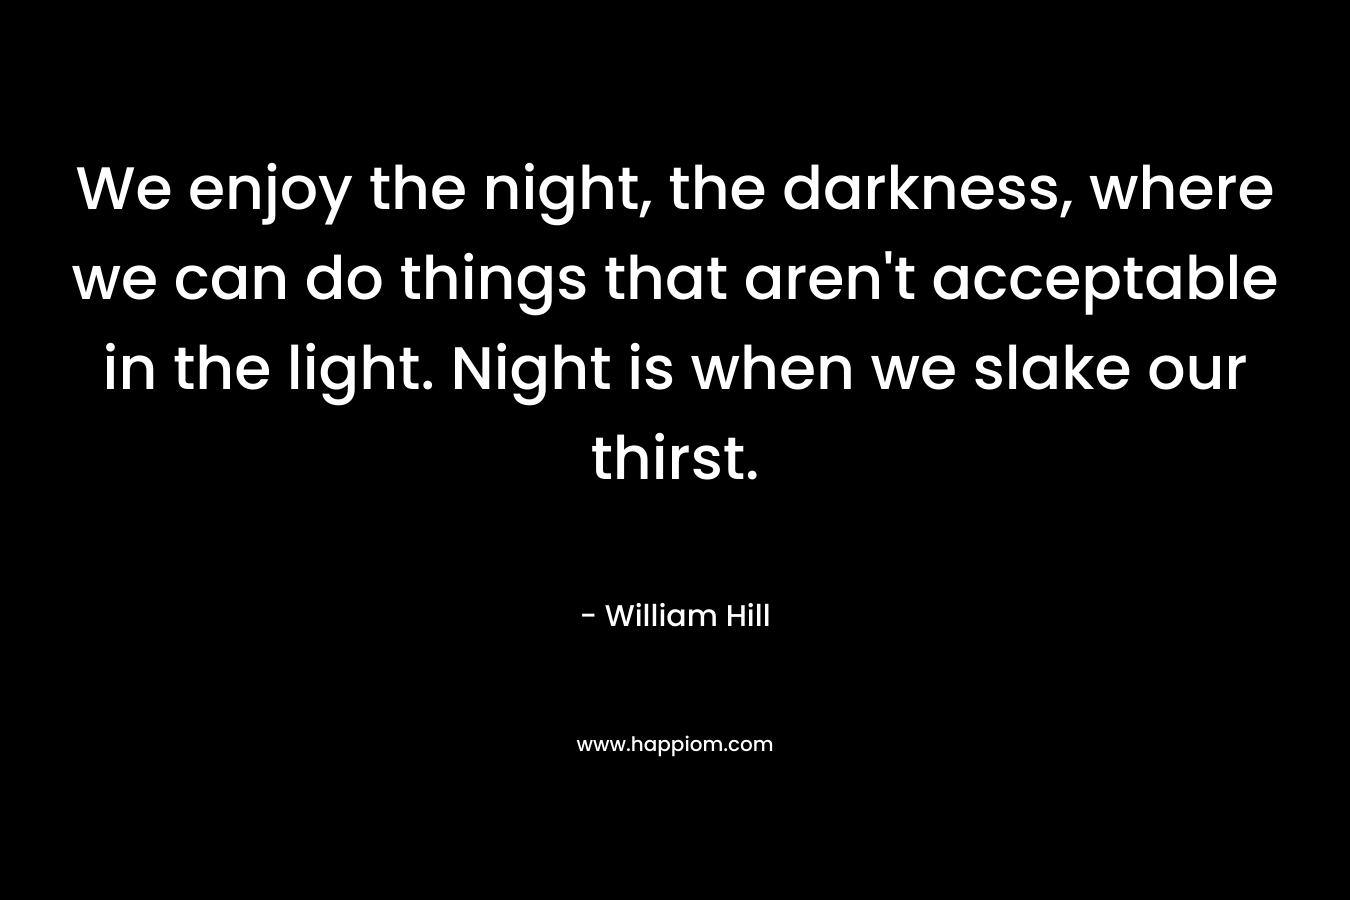 We enjoy the night, the darkness, where we can do things that aren't acceptable in the light. Night is when we slake our thirst.